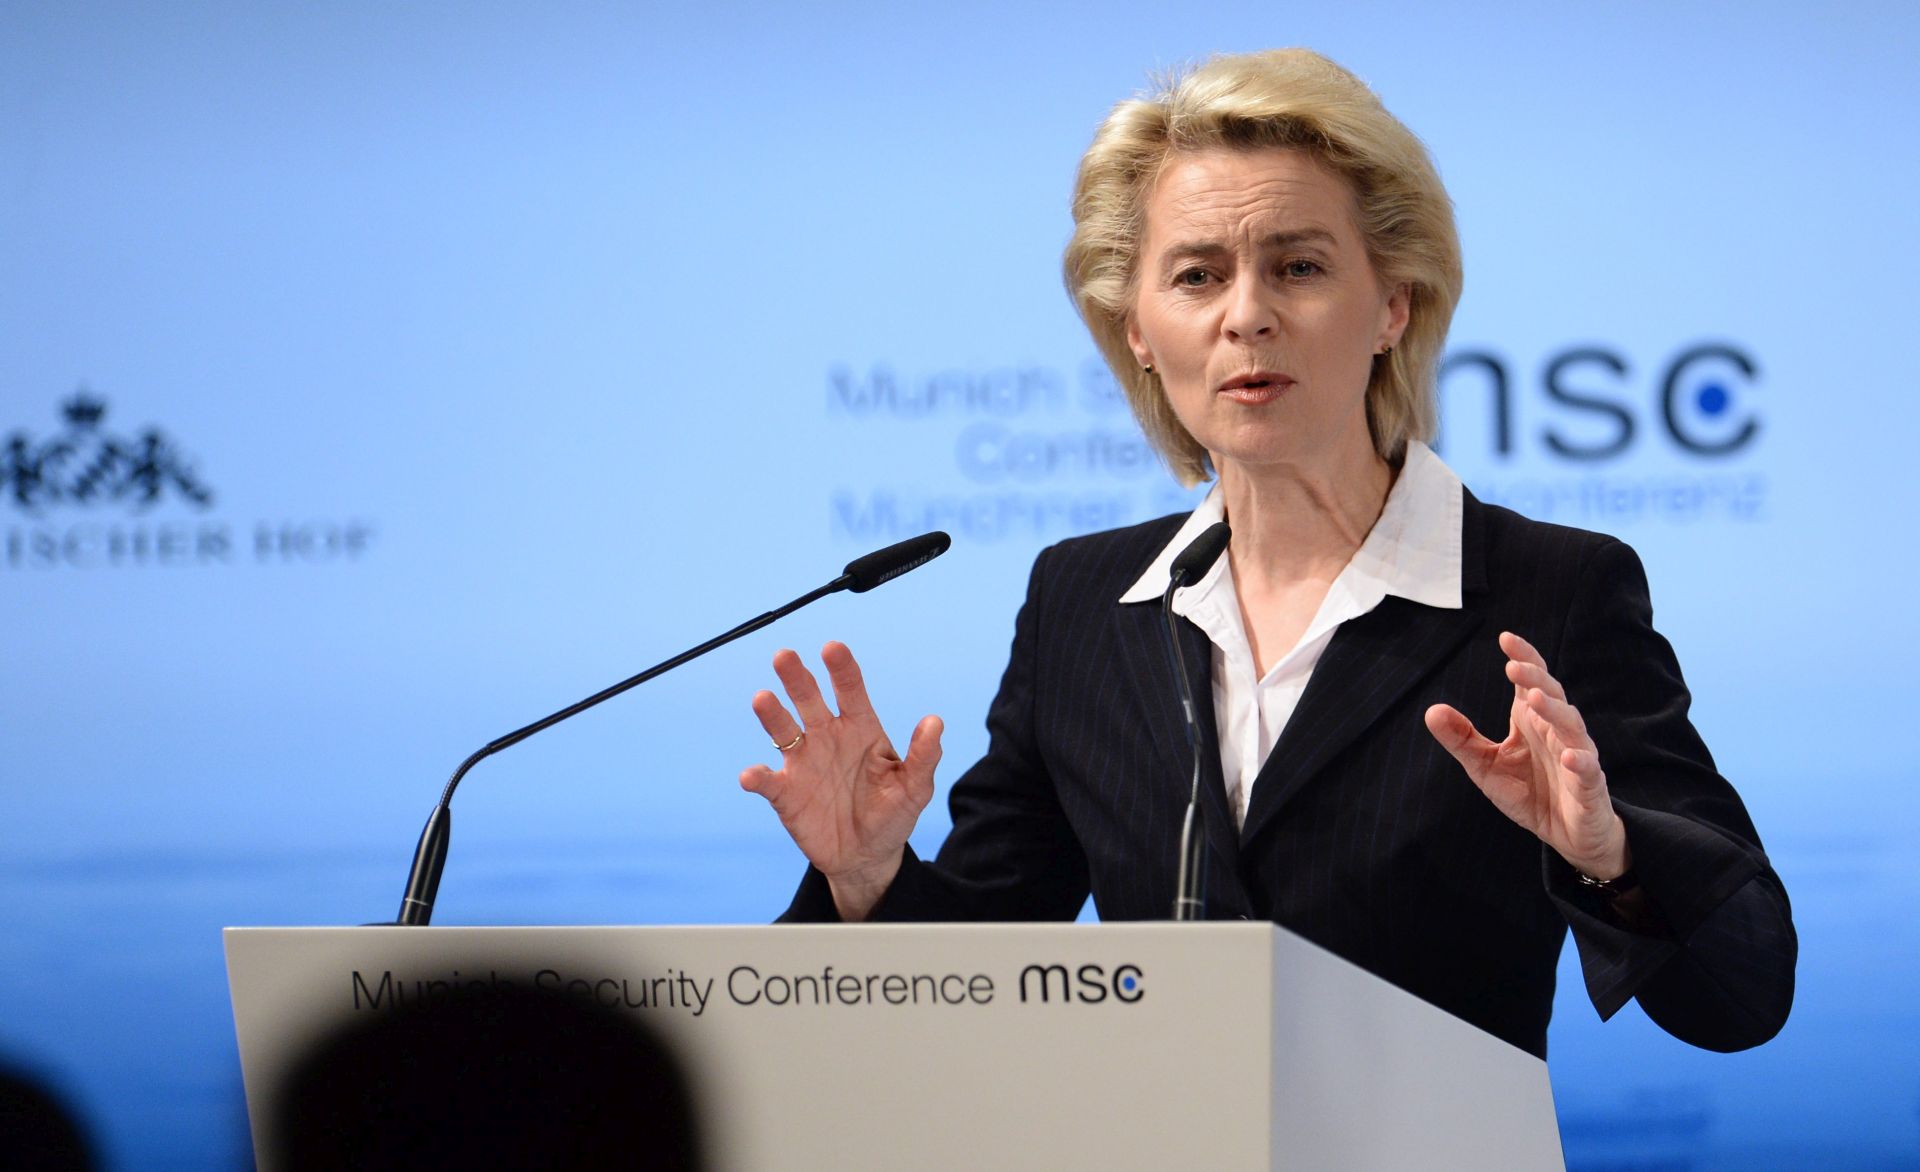 epa05156421 Geman Minister of Defence Ursula von der Leyen speaks at the 52nd Security Conference at Hotel Bayerischer Hof in Munich, Germany, 12 February 2016. The 52nd Security Conference, where foreign policy and defence experts are meeting to discuss global crises continues until 14 February 2016.  EPA/ANDREAS GEBERT